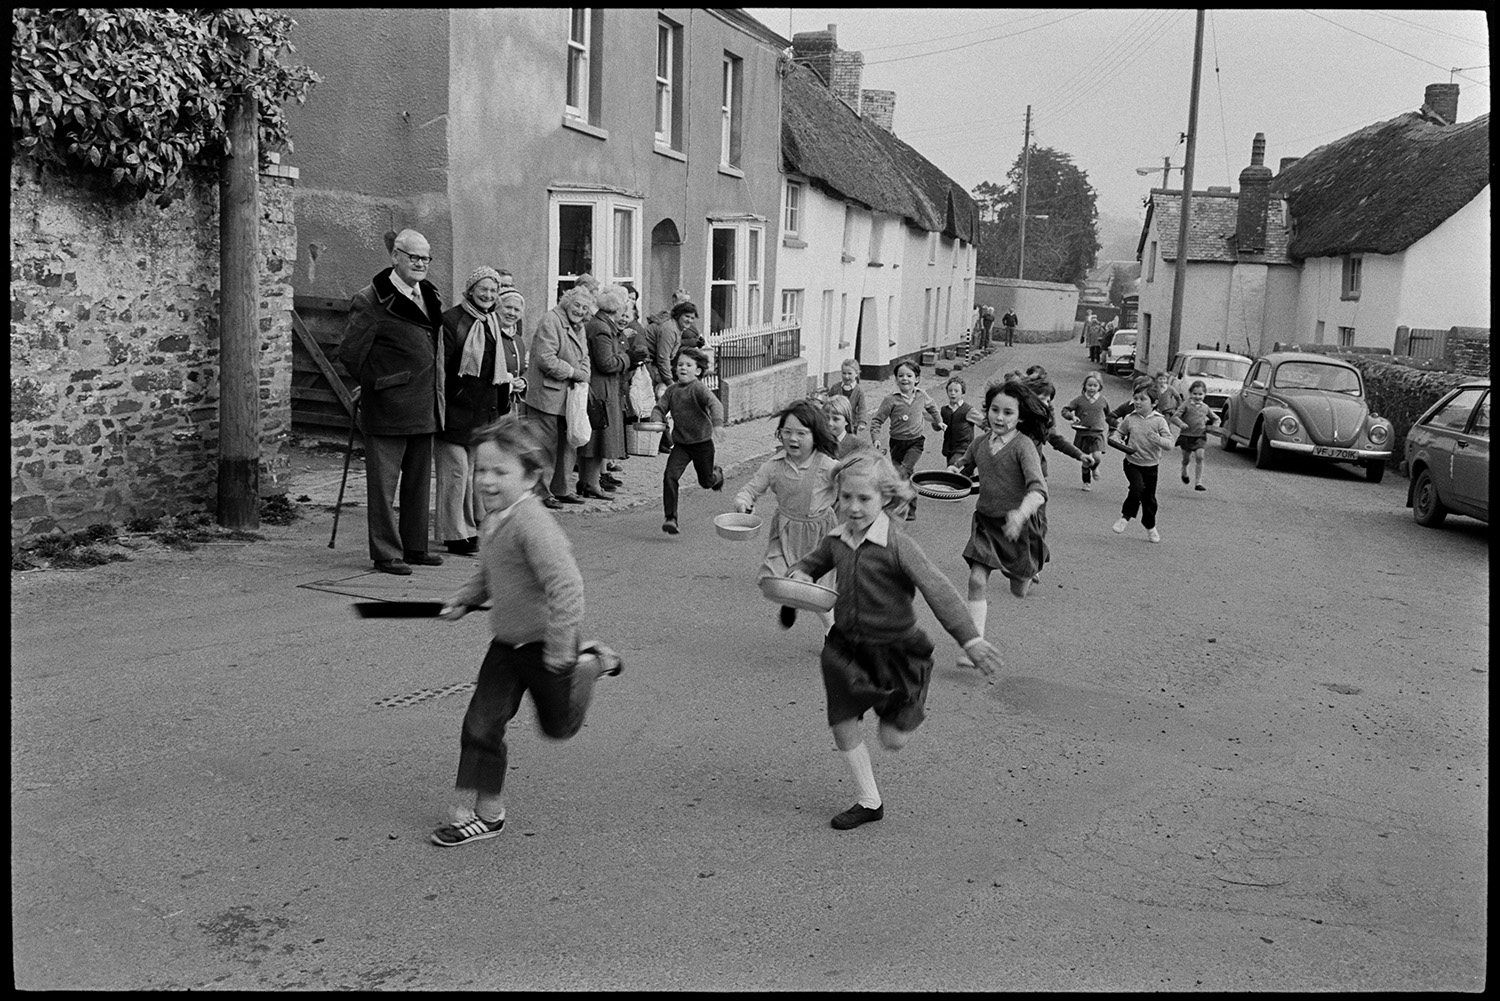 Children and parents at Pancake Race in village street.
[Children running along Fore Street, Dolton in a pancake race. A line of adults are watching from the side of the street.]